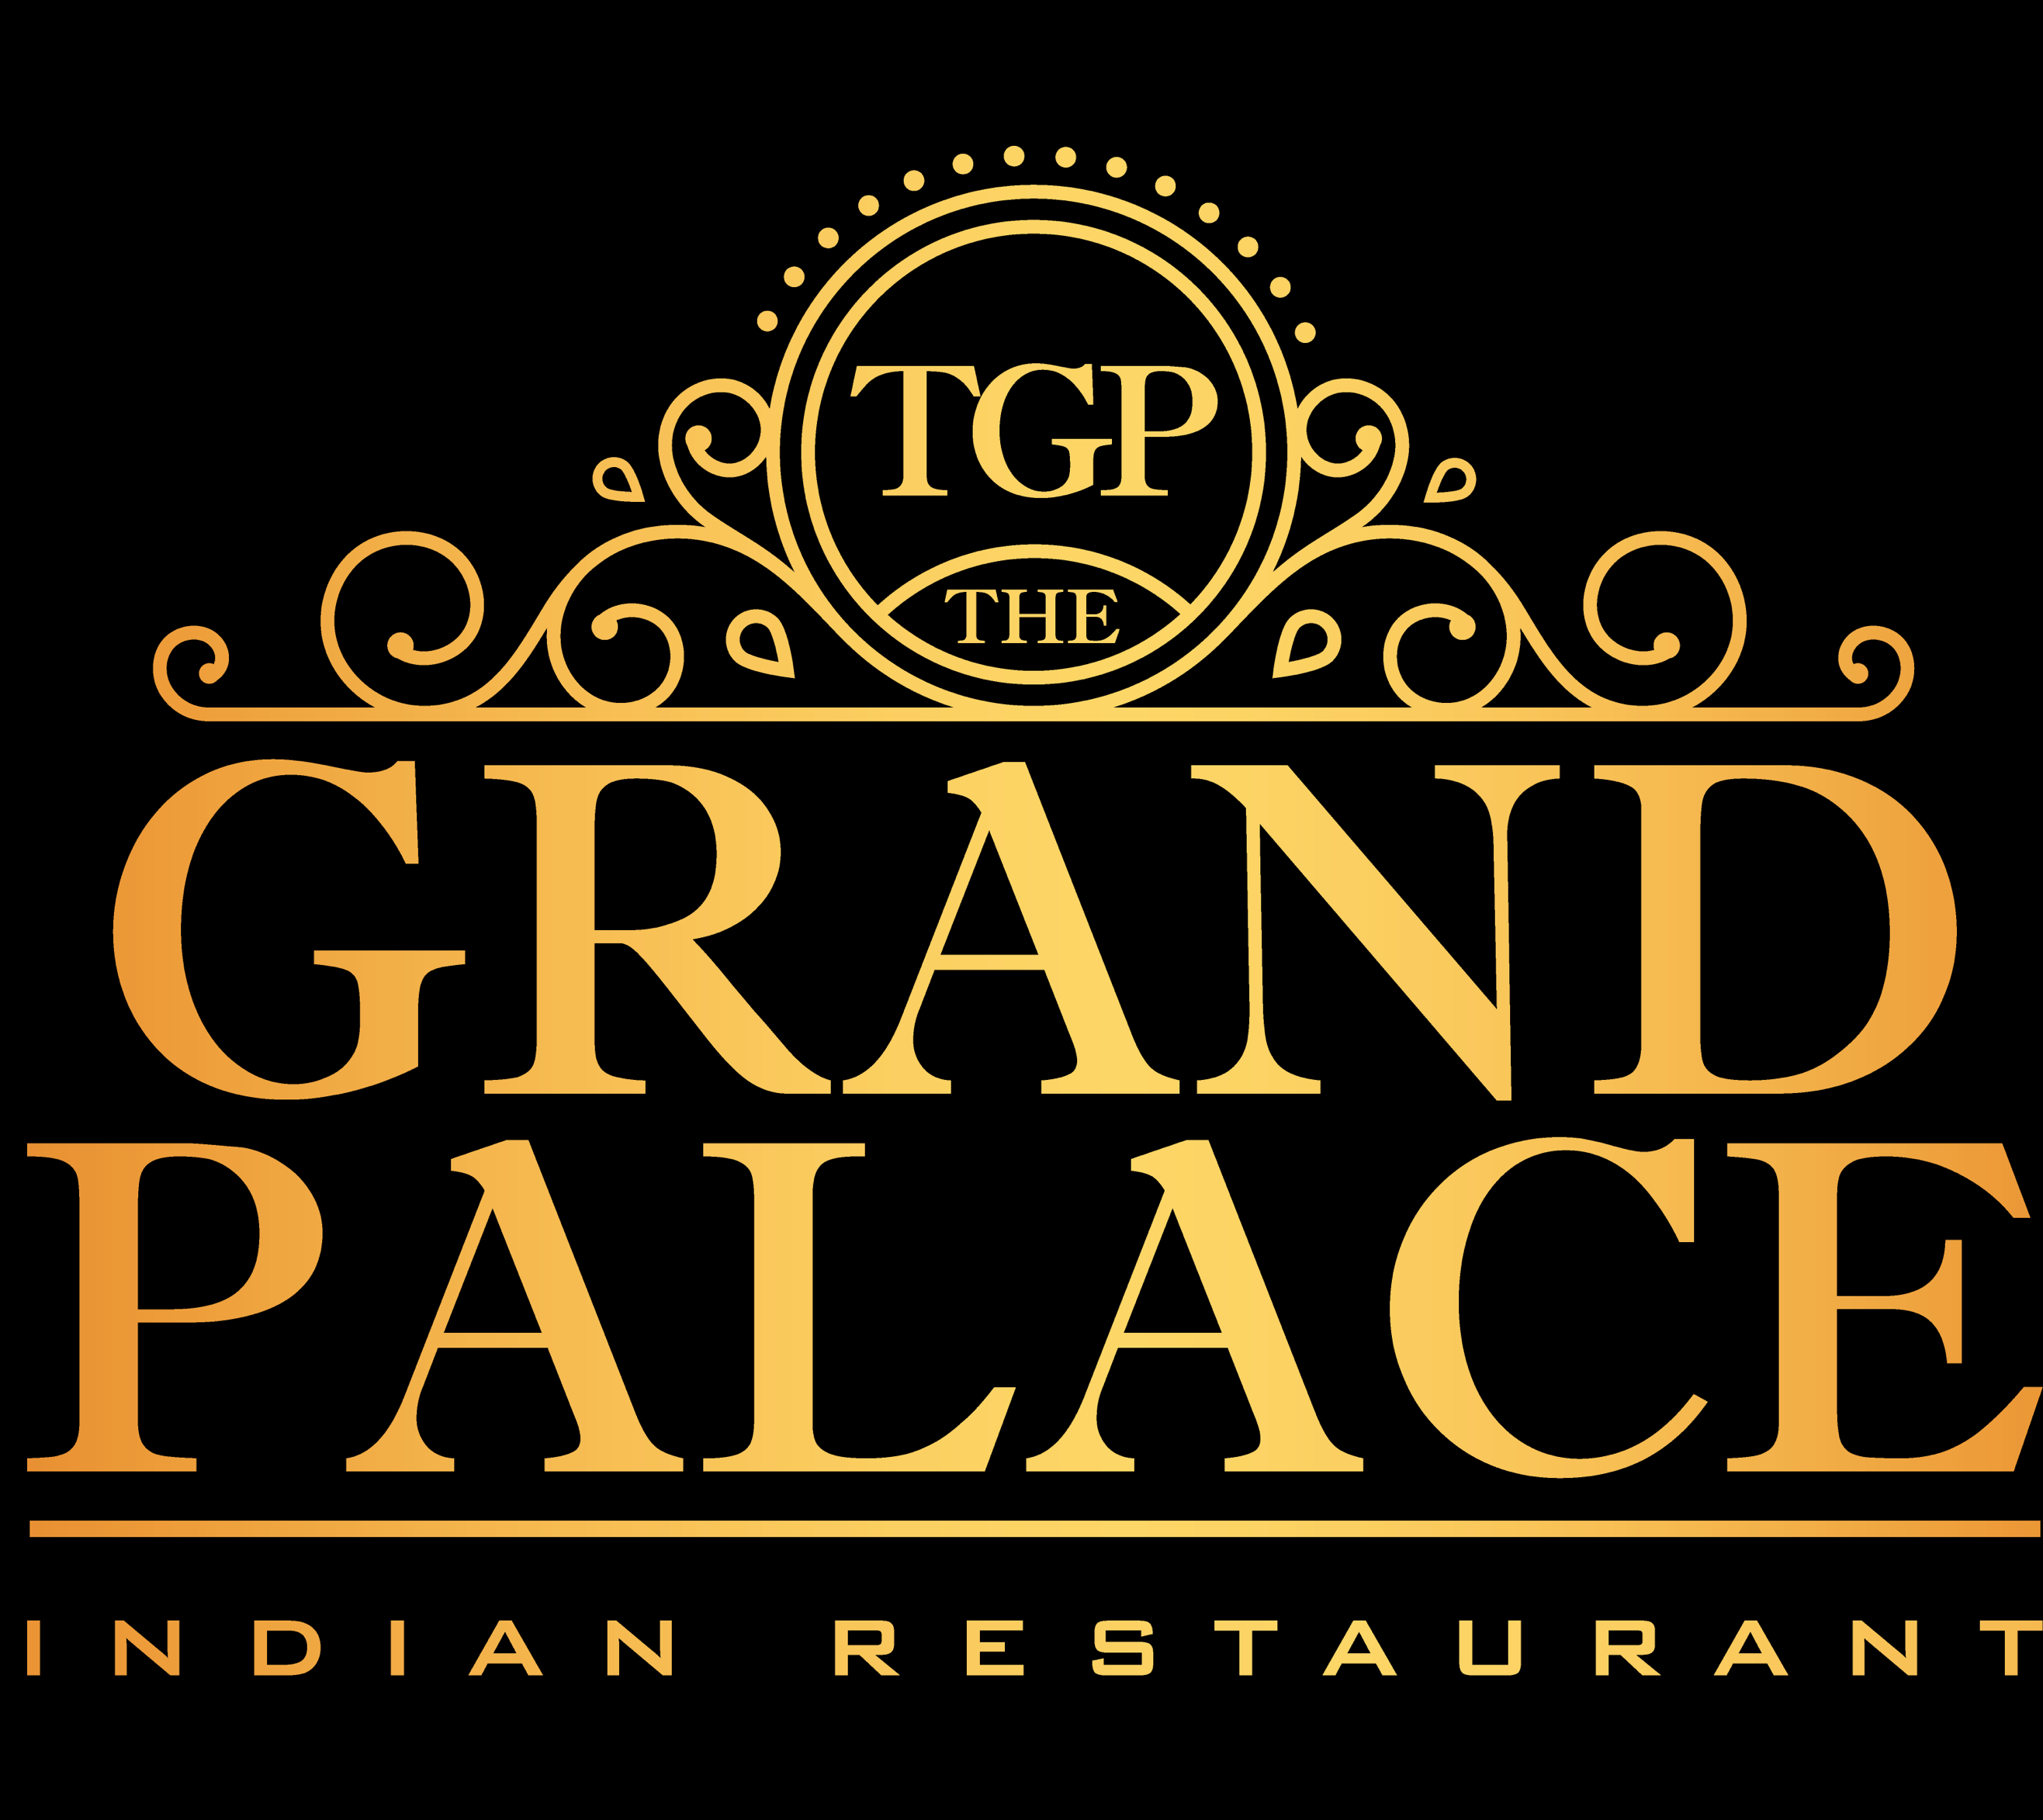 The Grand Palace Indian Restaurant